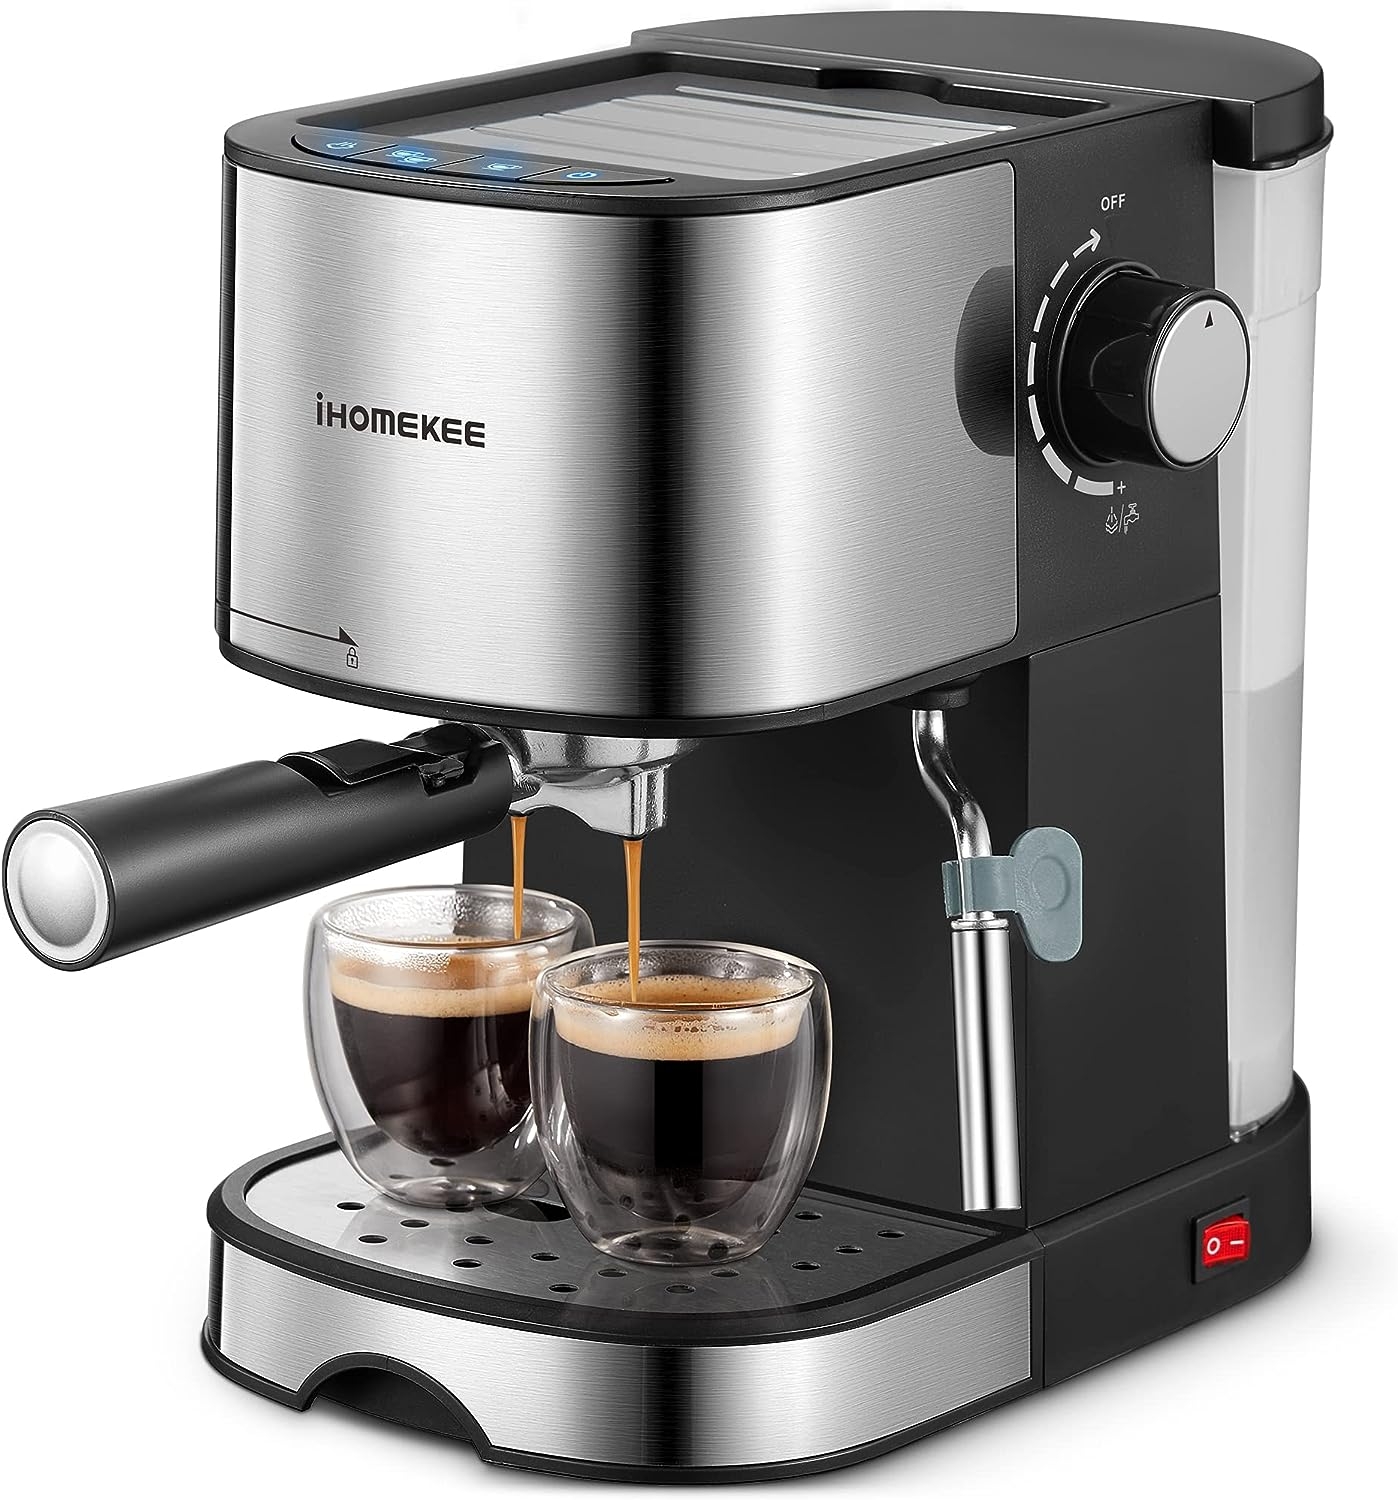 Ihomekee Espresso Machine 15 Bar Pump Pressure, Espresso and Cappuccino  Coffee Maker with Milk Frother/Steam Wand for Latte, – Coffee Gear